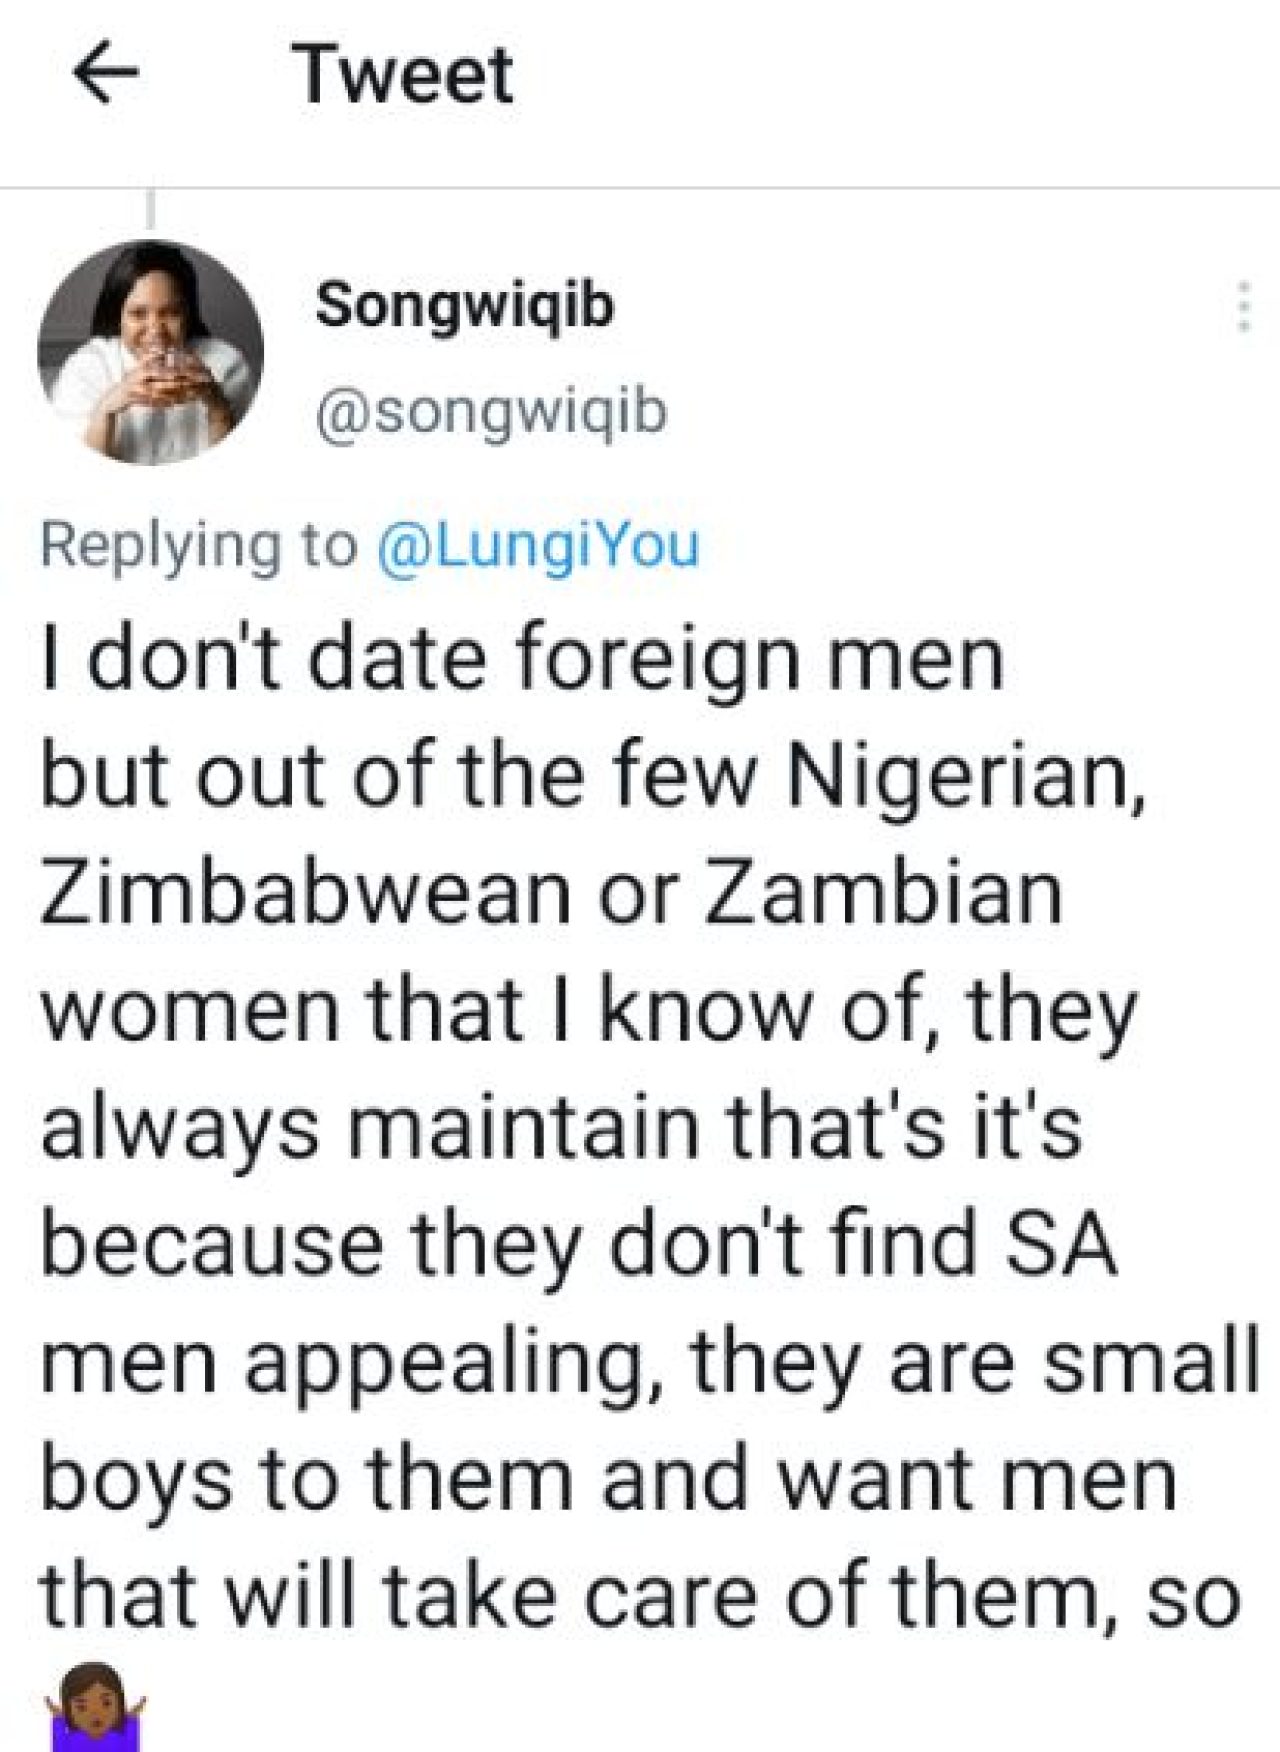 "I've never heard any Nigerian lady say, “I want an SA man”, it's always our girls throwing themselves at Nigerian men. AdvertAfrica News on afronewswire.com: Amplifying Africa's Voice | afronewswire.com | Breaking News & Stories